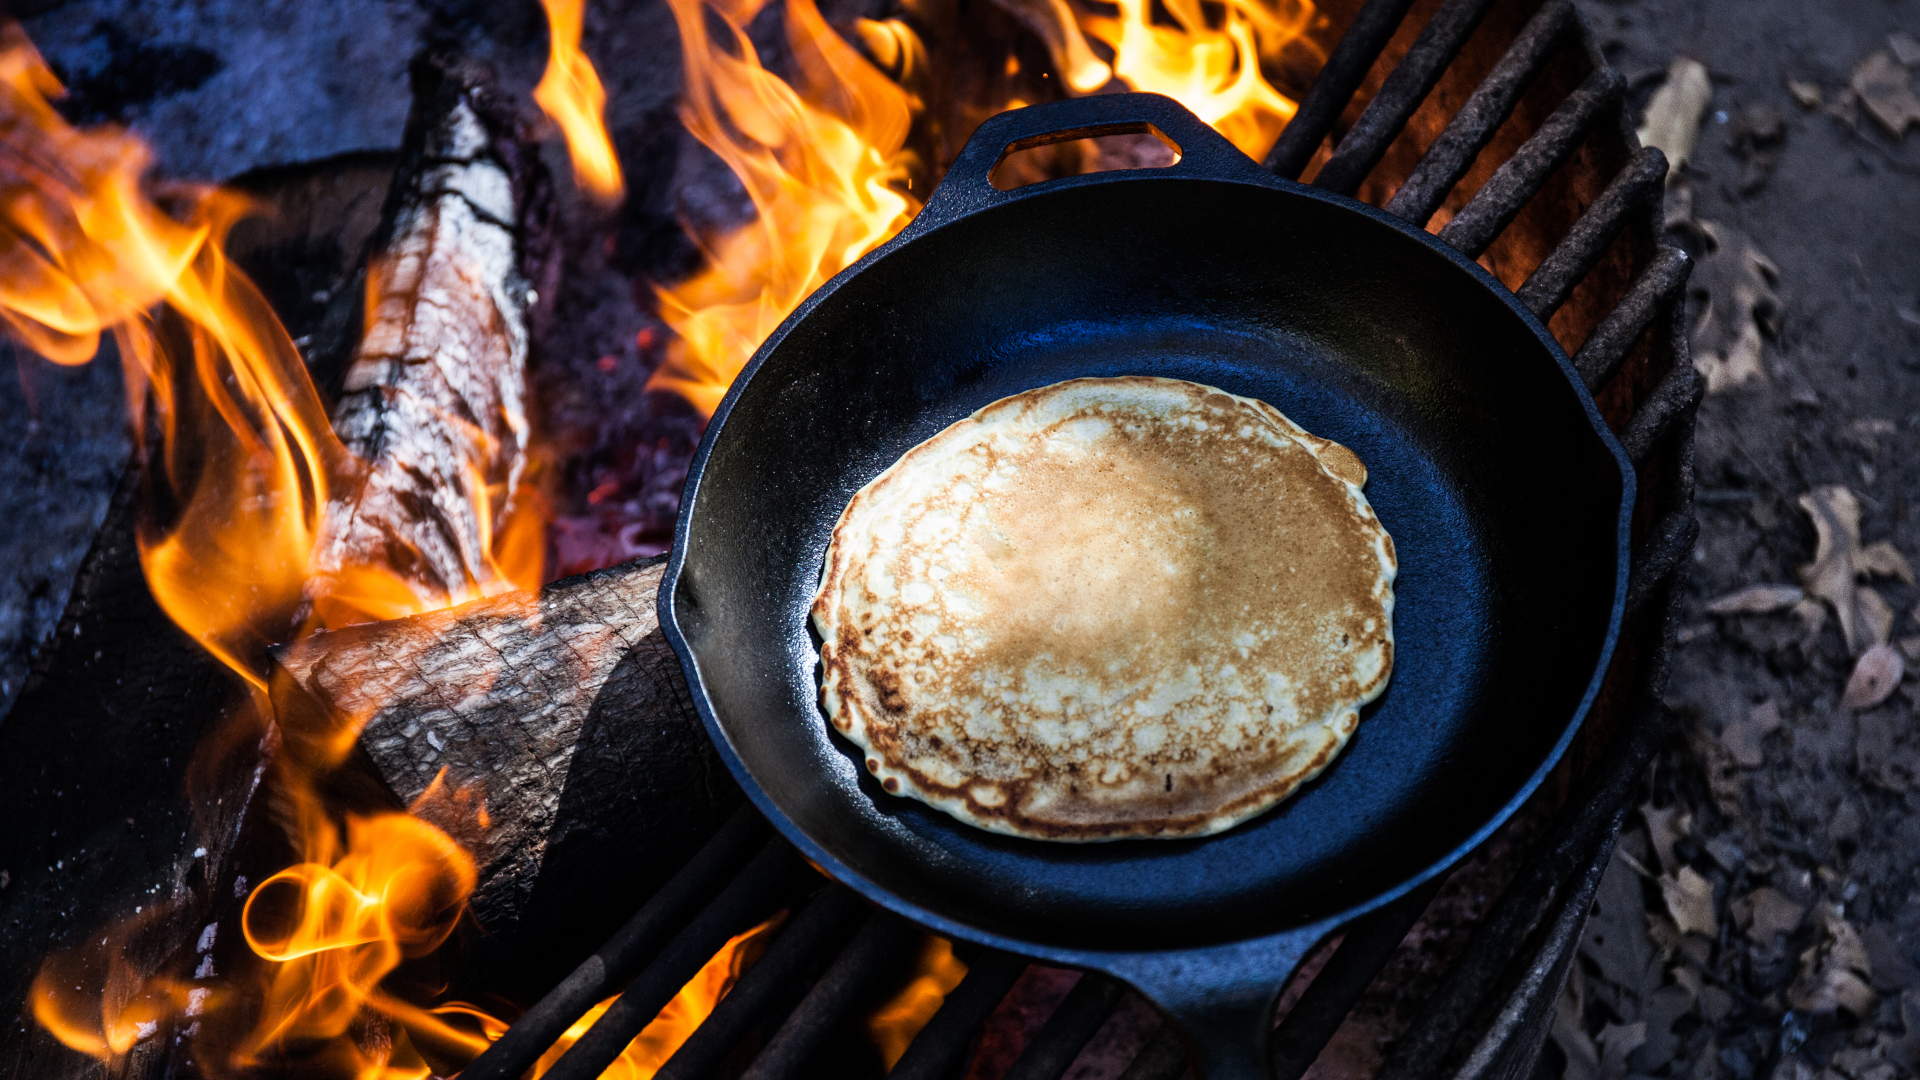 Camping with Cast Iron Pans – Stovetop, Charcoal, or Campfire?